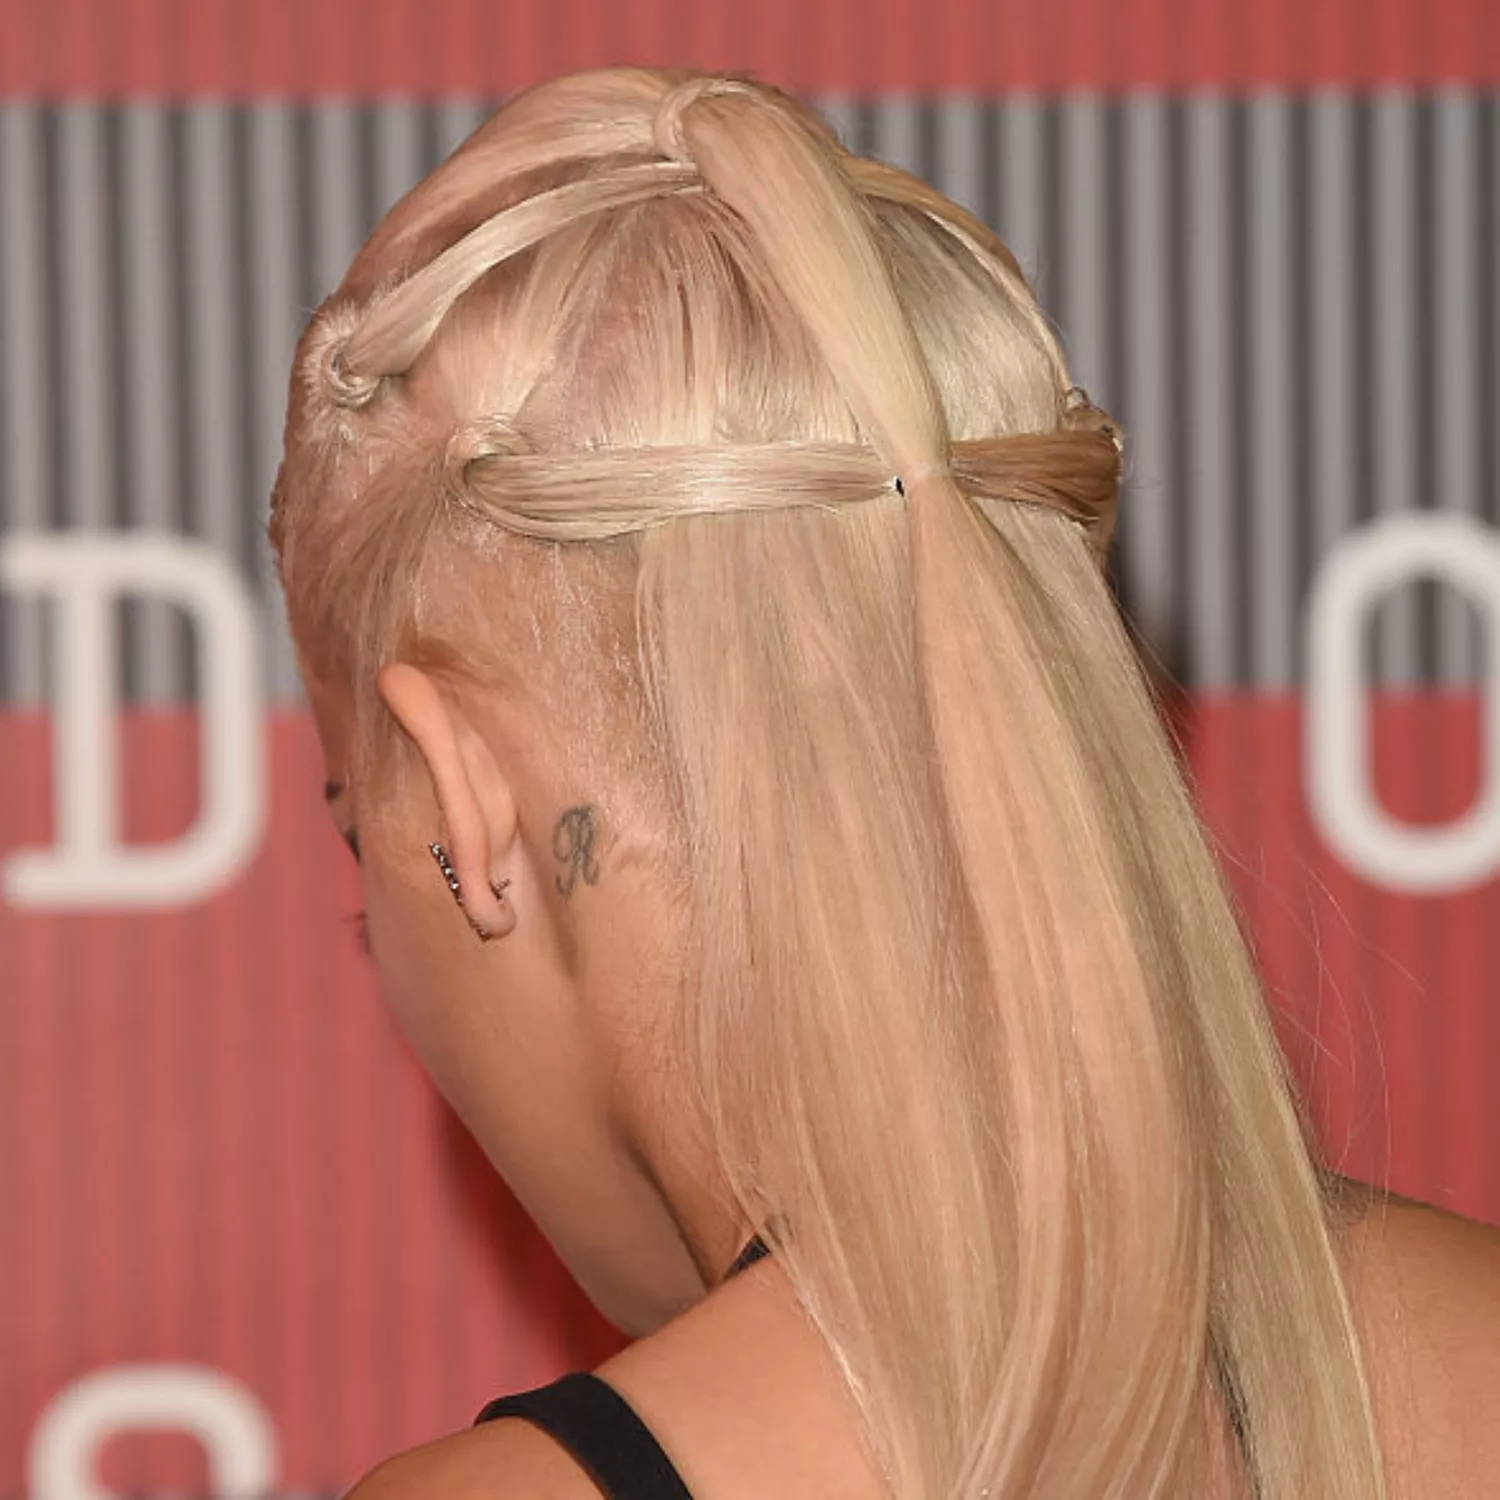 zoomed-in photo of Rita Ora with r initial tattoo behind the ear